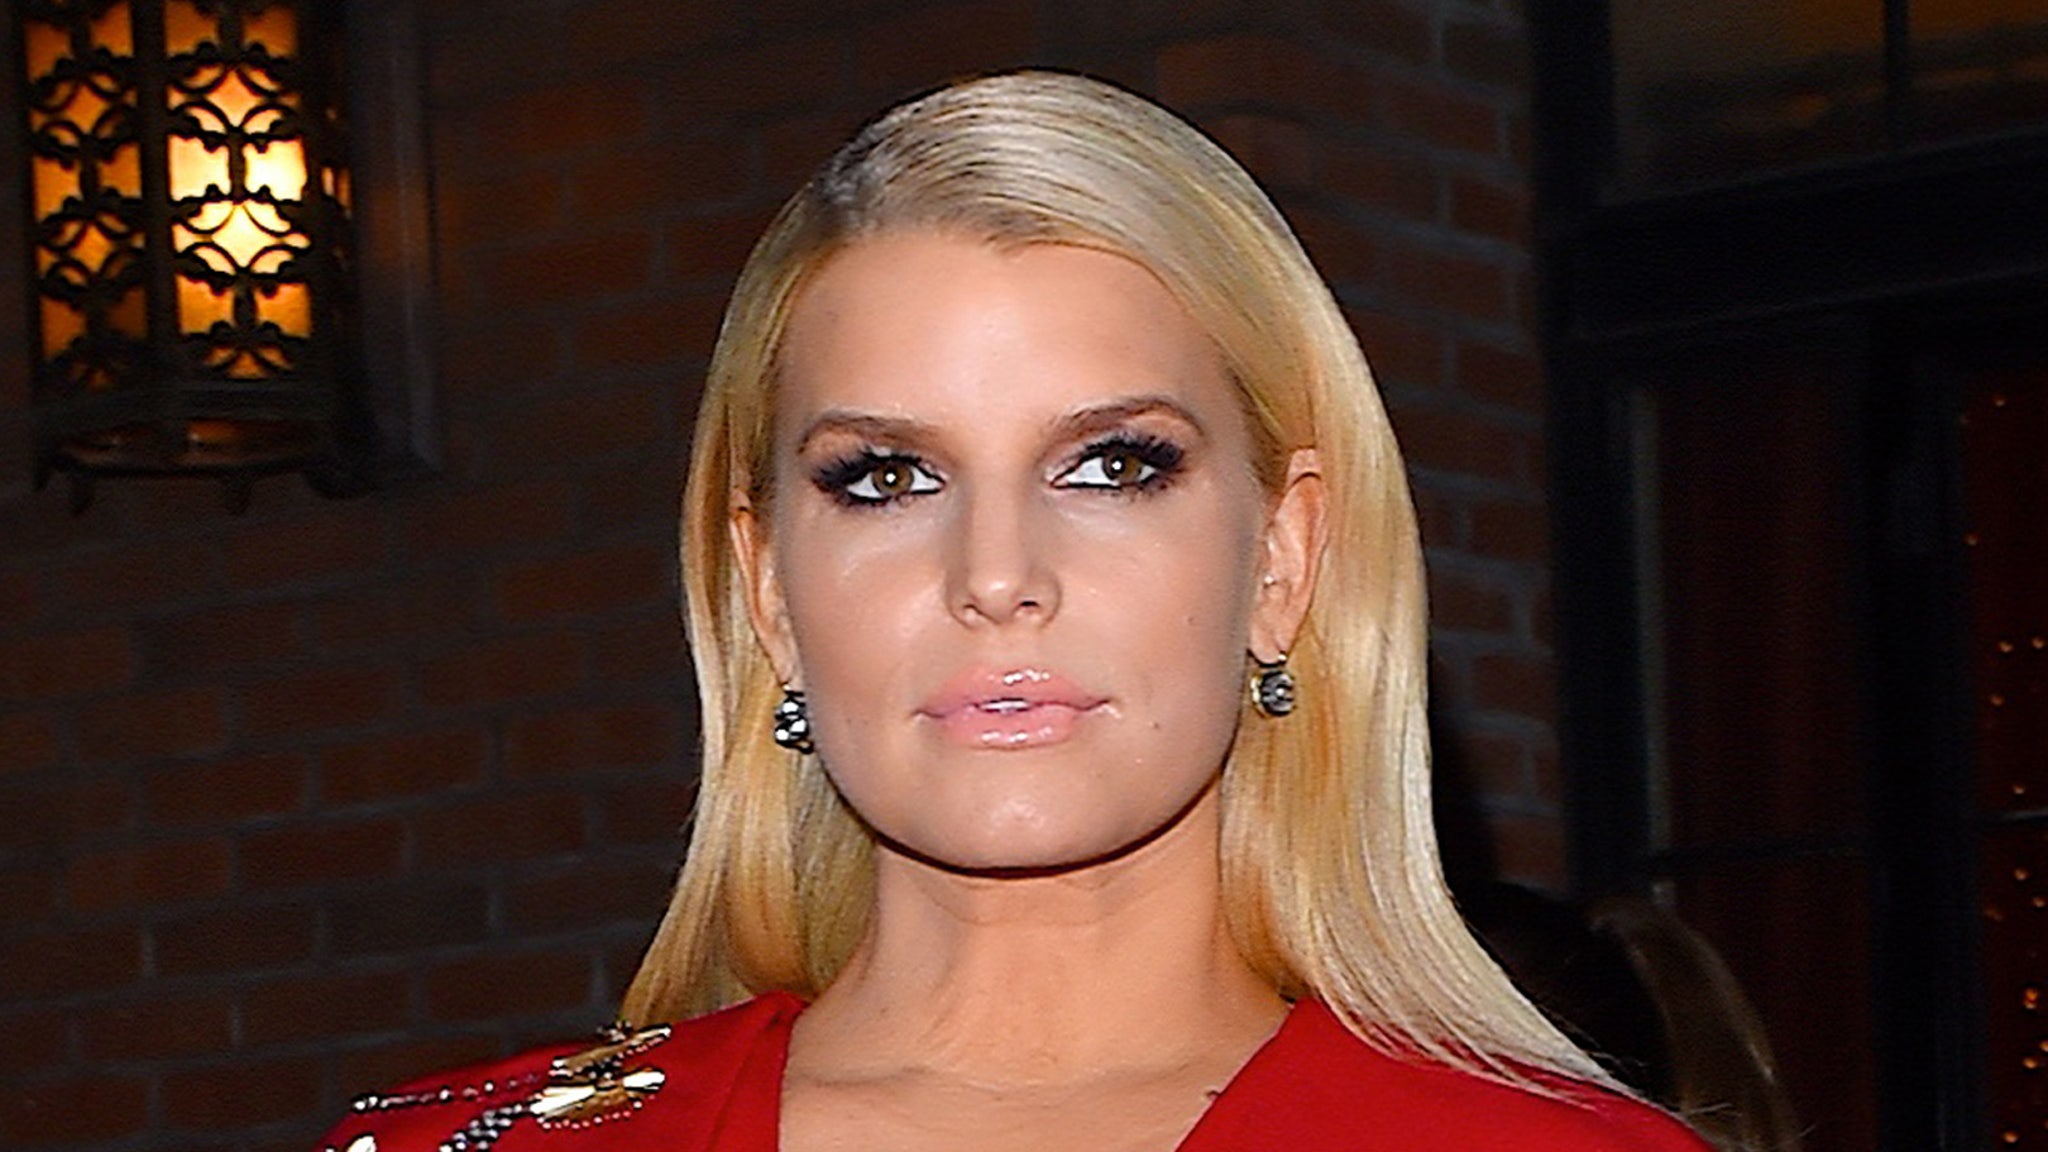 Jessica Simpson Opens Up About Staying Sober During Pandemic